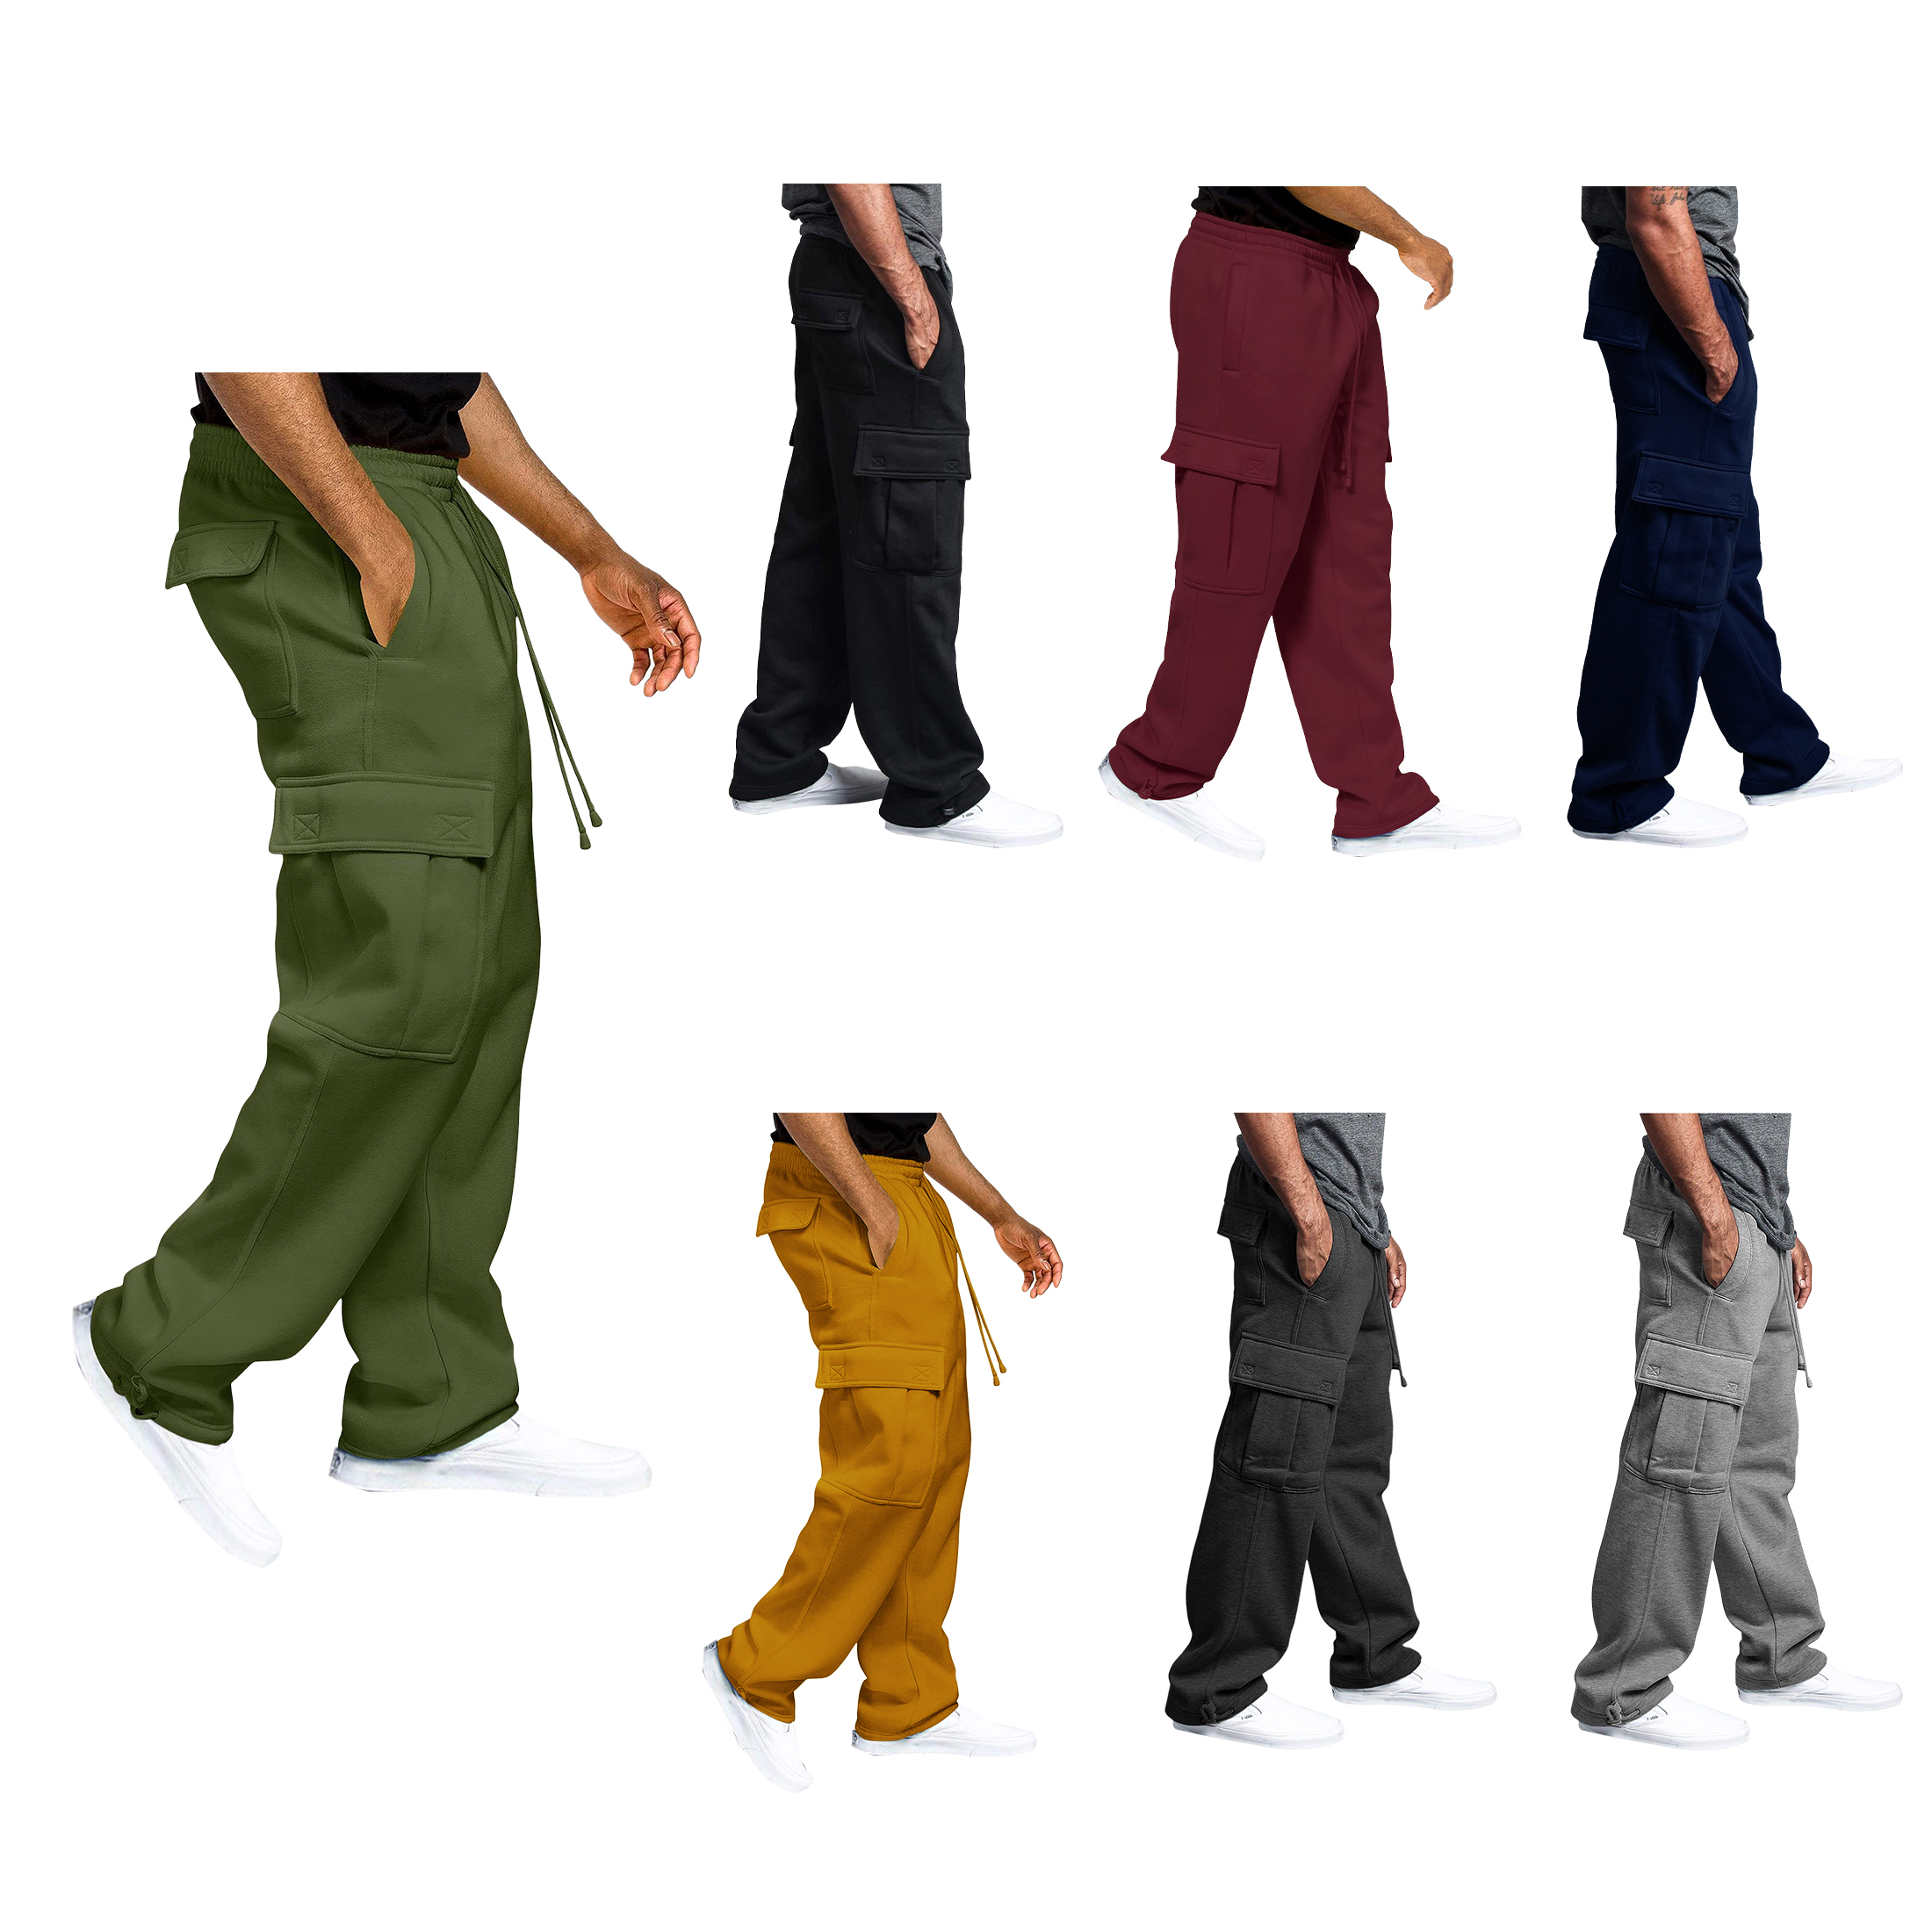 2-Pack: Men's Casual Solid Cargo Jogger Sweatpants With Pockets - S